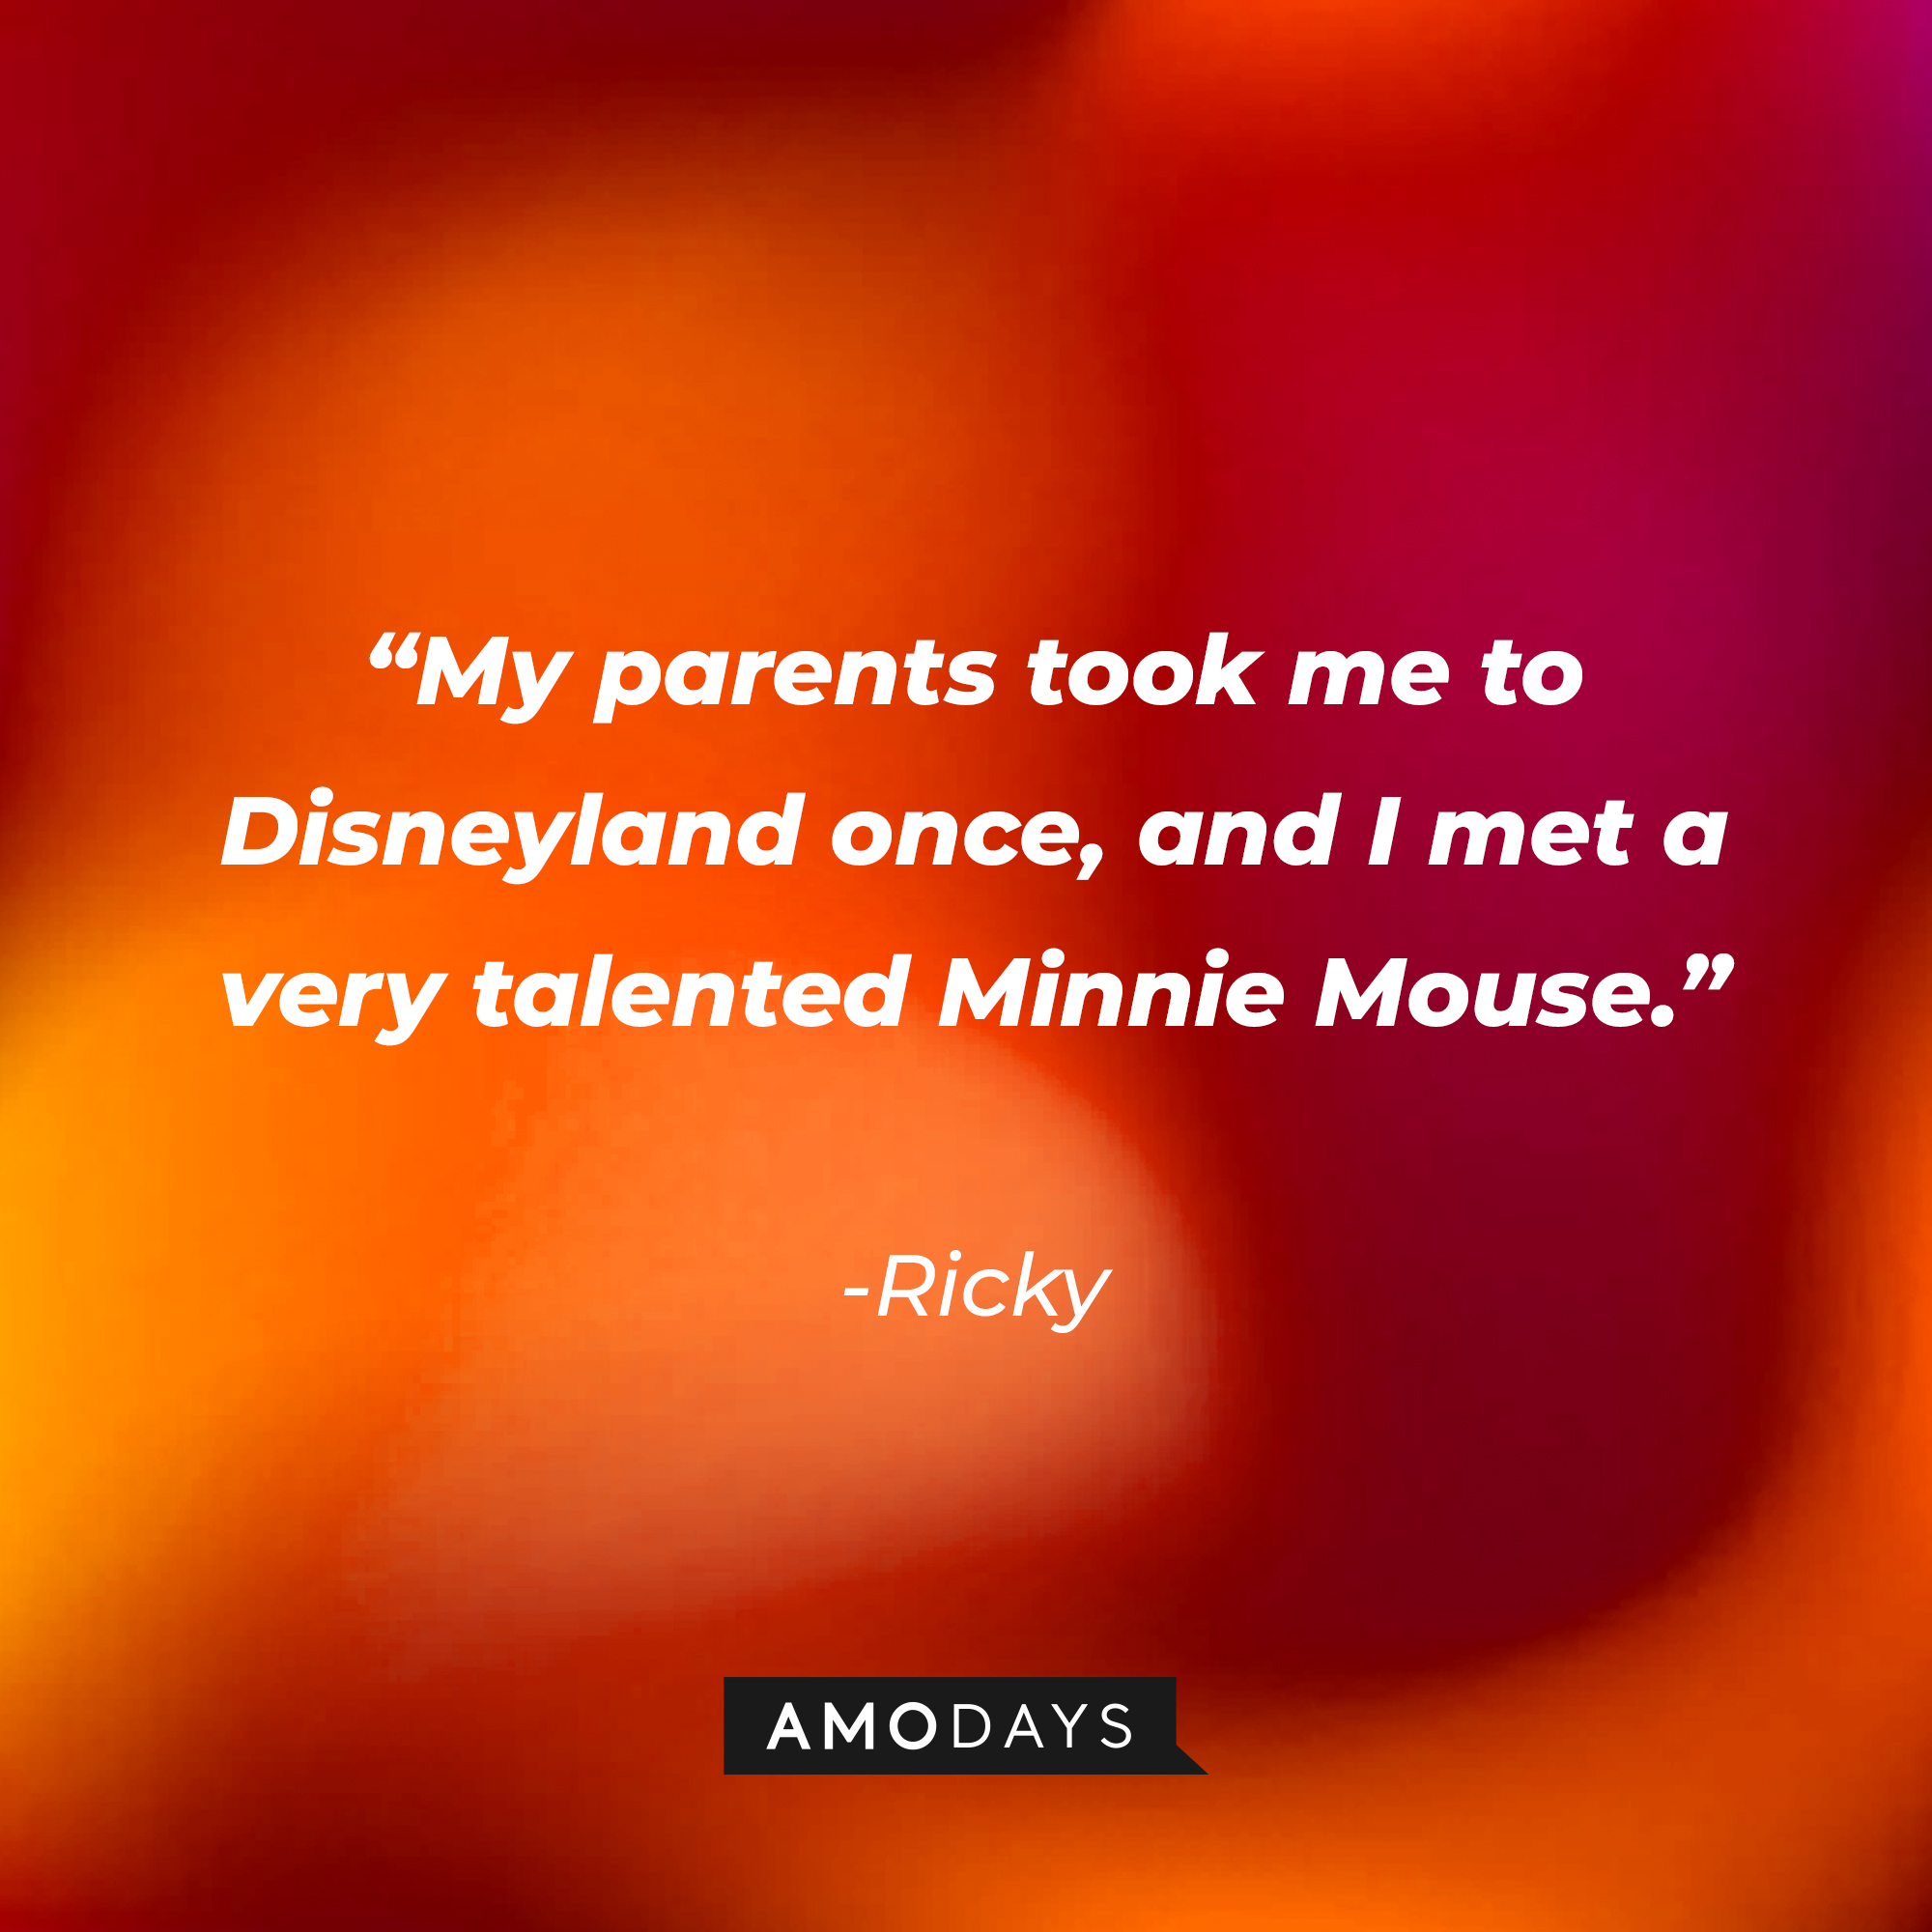 Ricky’s quote: "My parents took me to Disneyland once, and I met a very talented Minnie Mouse." | Source: AmoDays